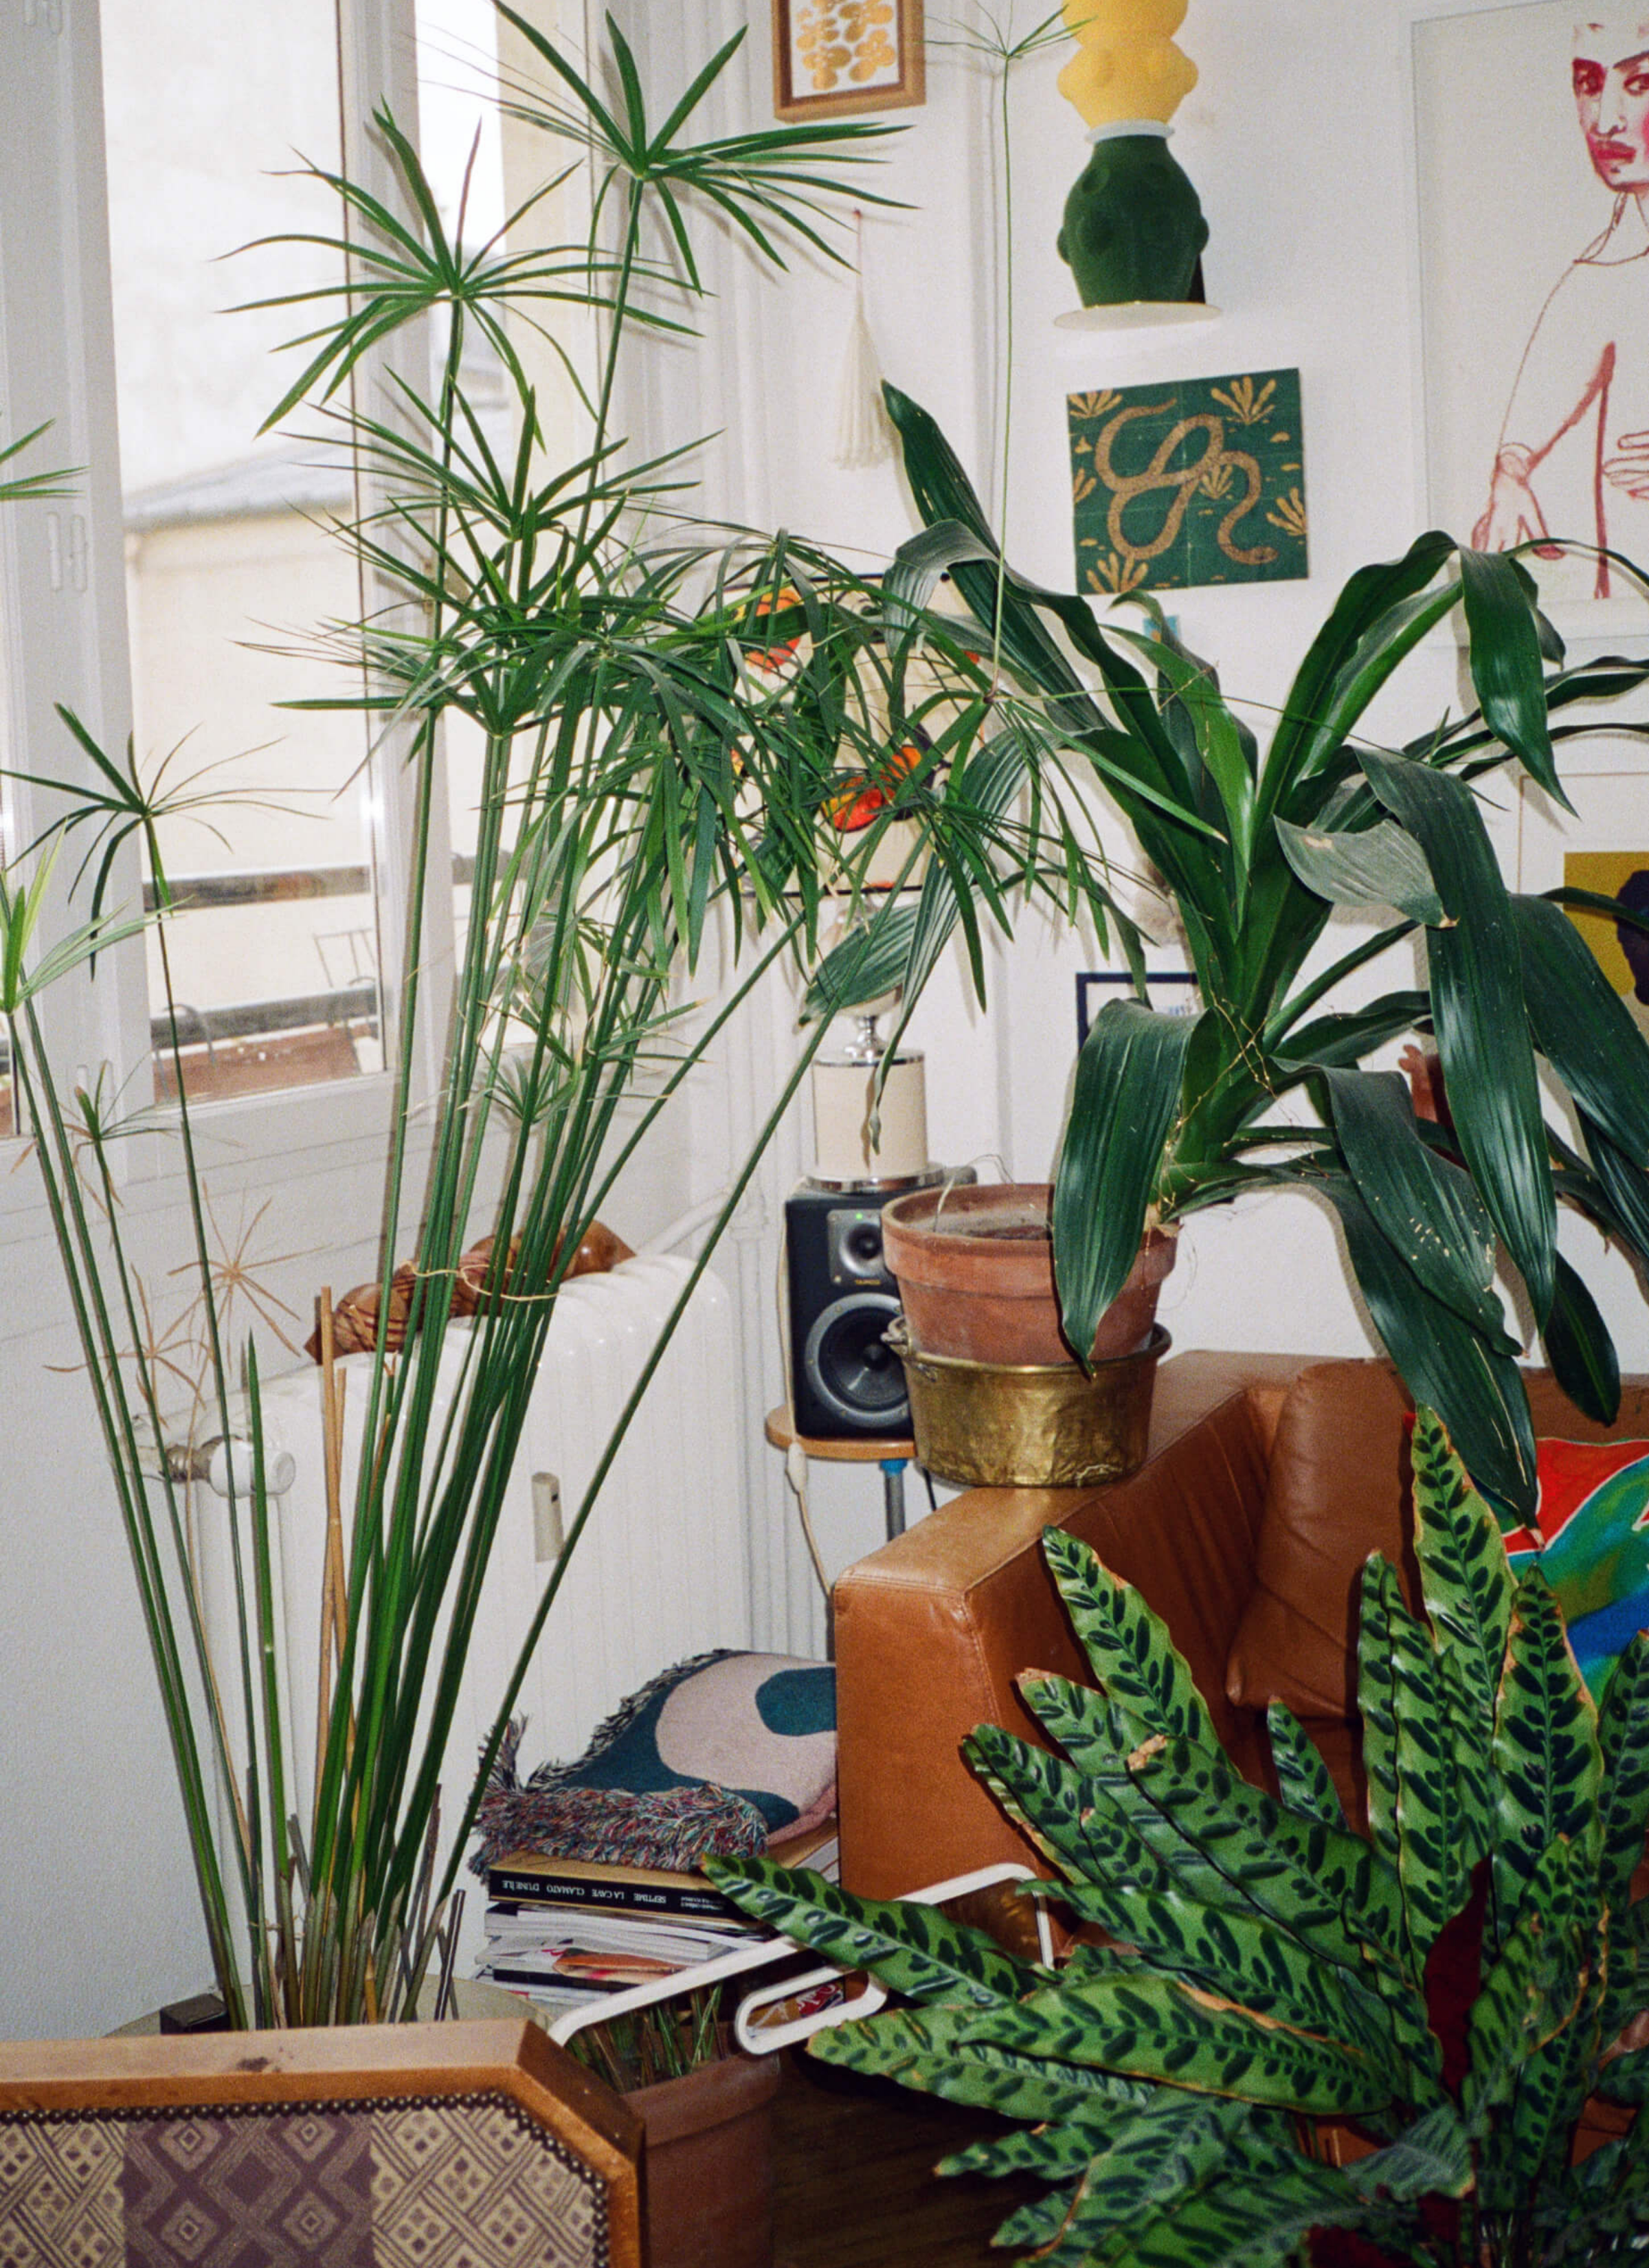 A Rattlesnake plant and two other kinds of house plants sit in the room next to the sofa, a speaker and a lamp. And there are many paintings hung on the wall.